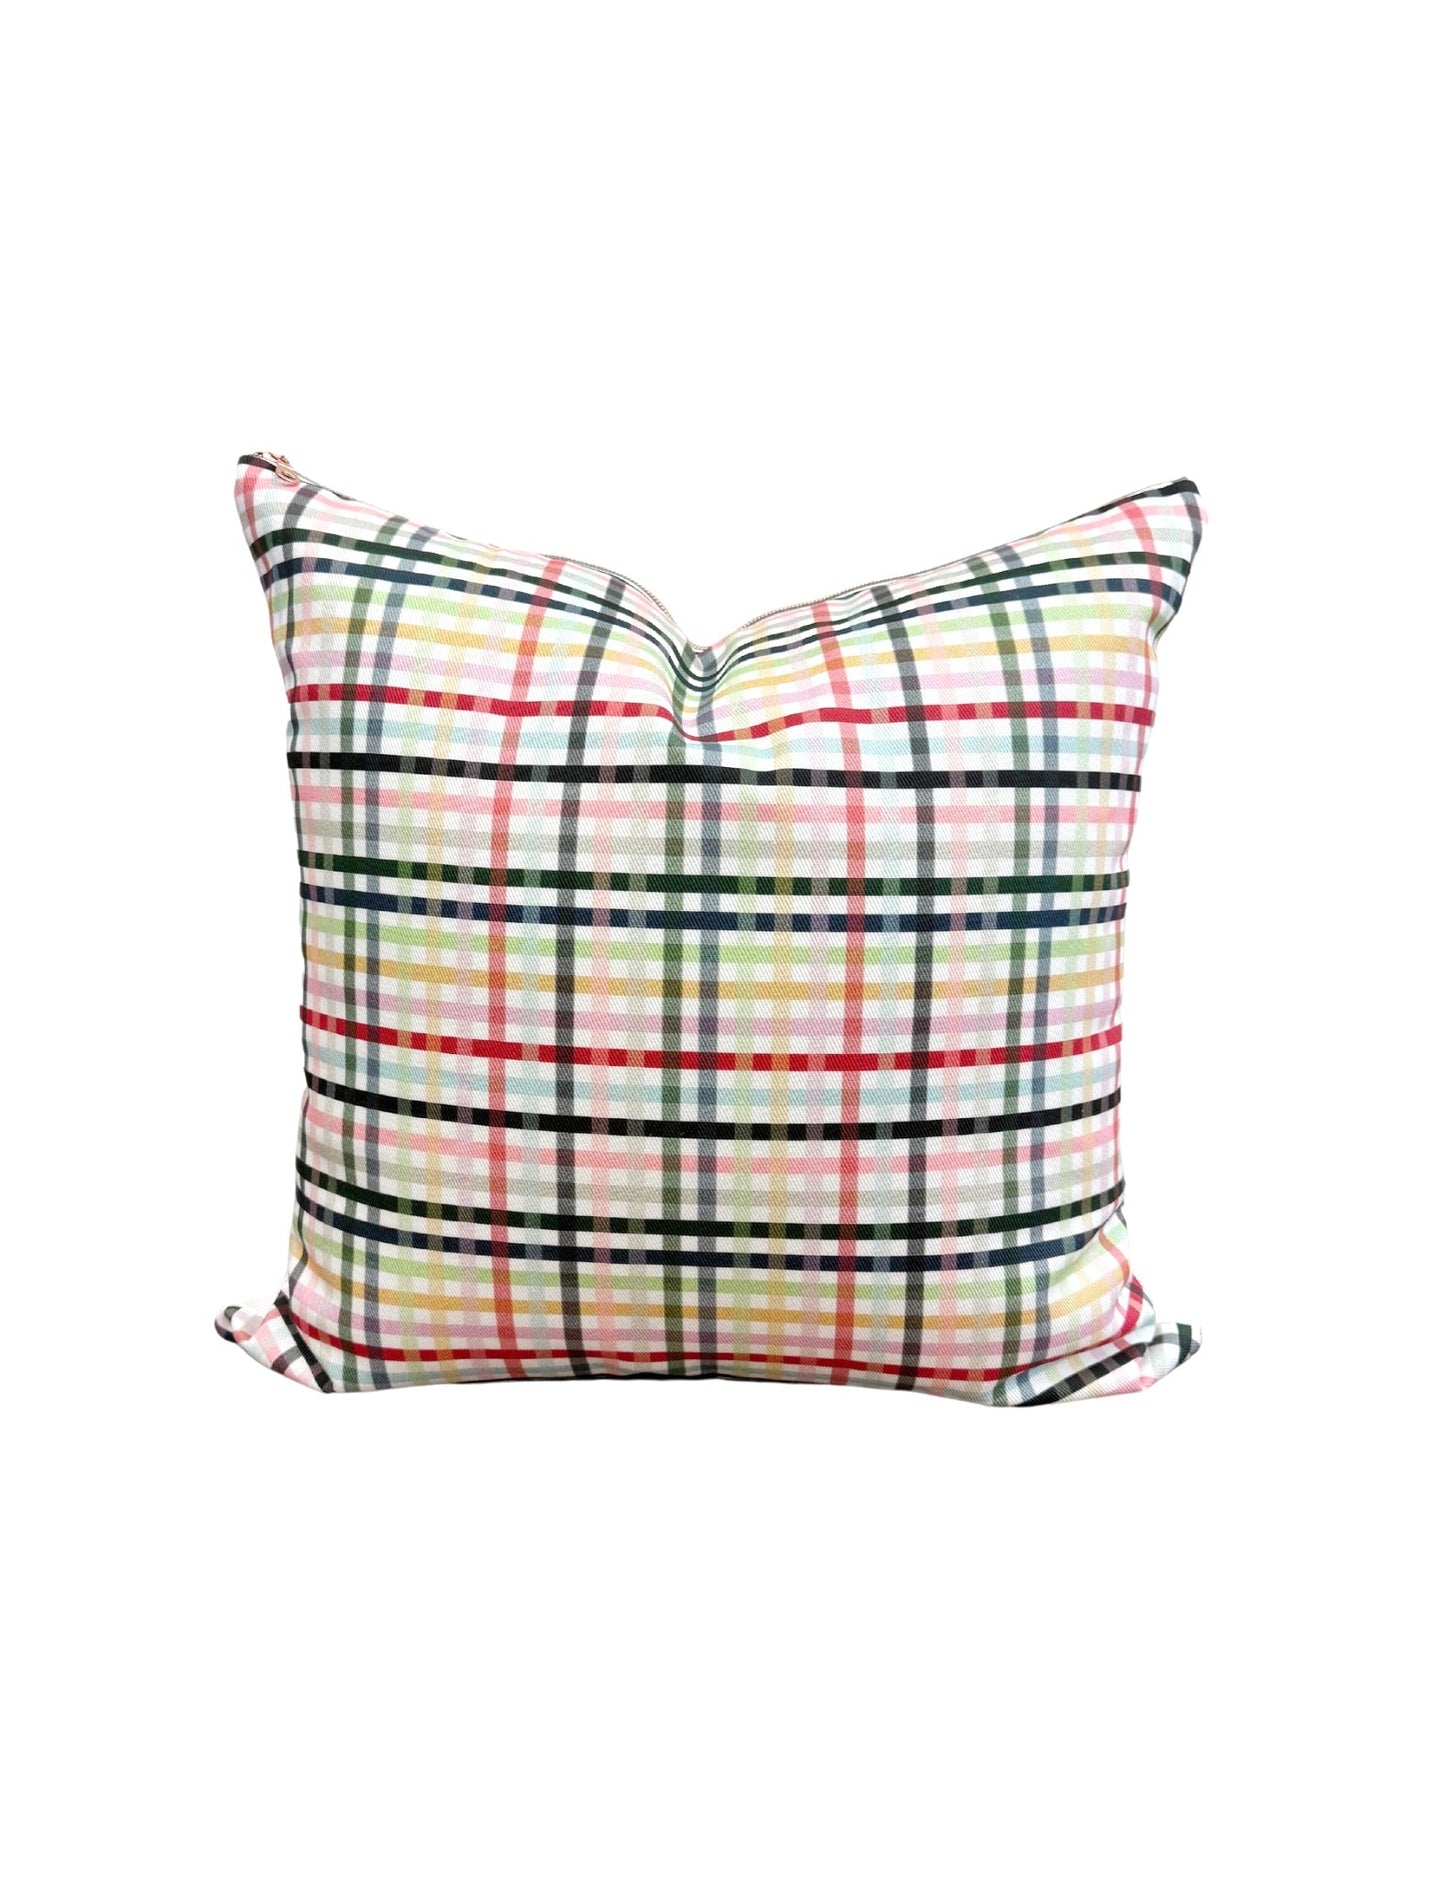 Taylor Swift - Eras Gingham + Karma is a Cat Pillow Cover + Reykjavik Throw